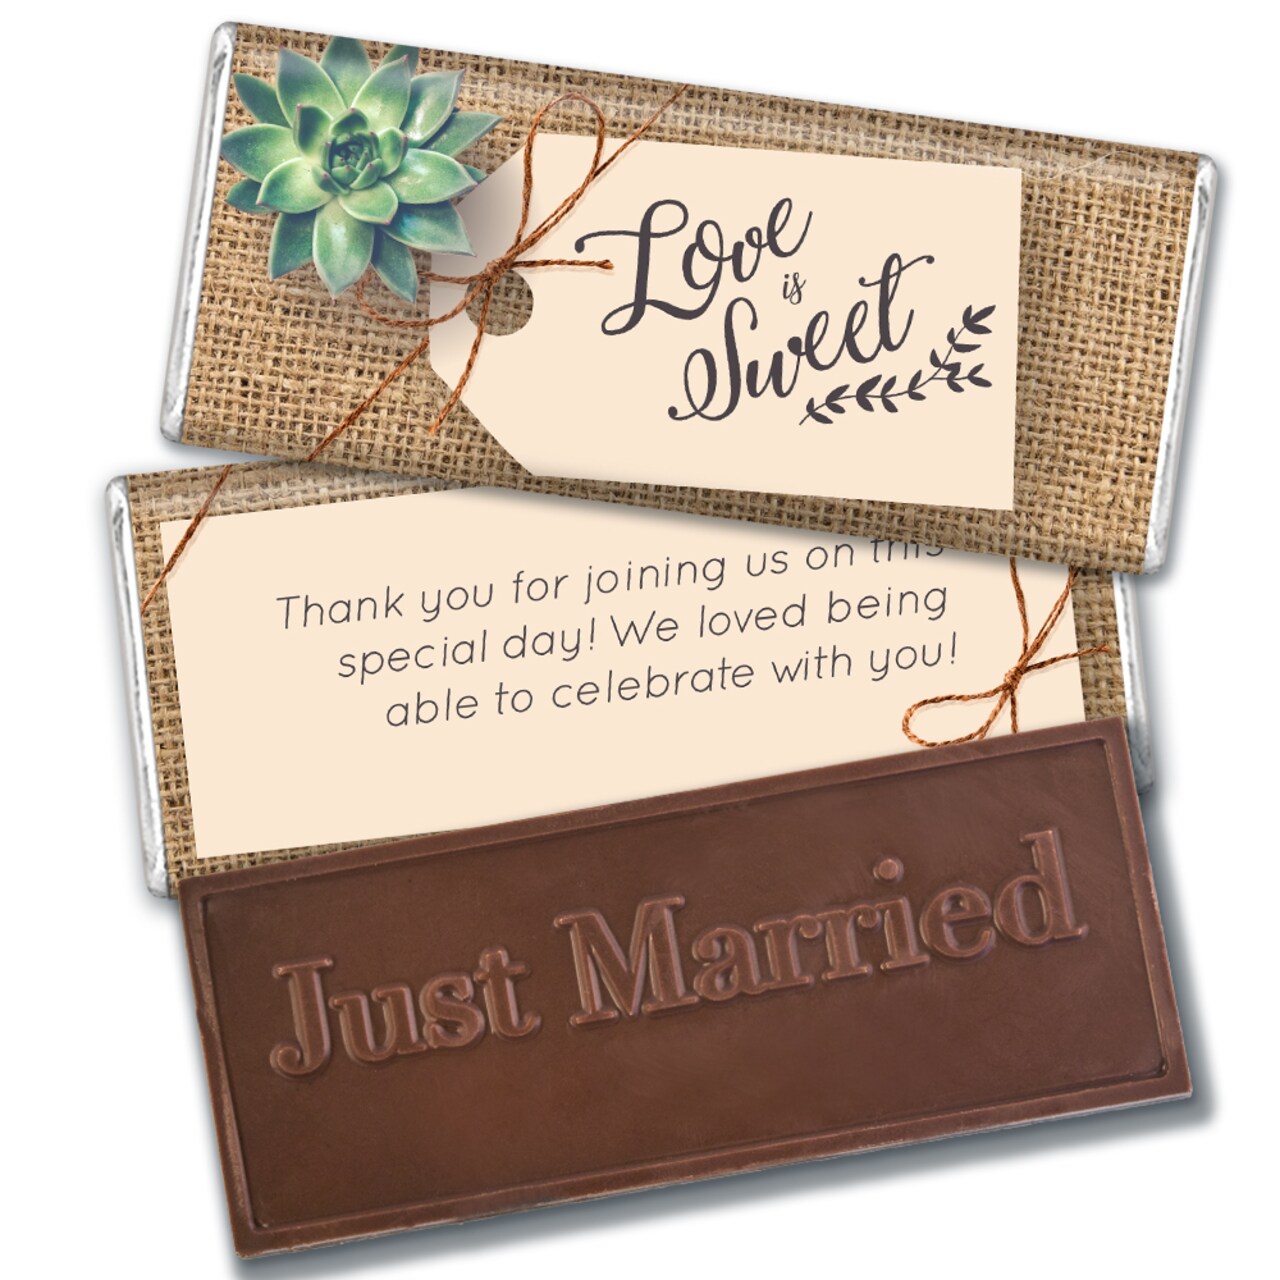 Wedding Candy Party Favors Embossed Belgian Chocolate Bars - Rustic